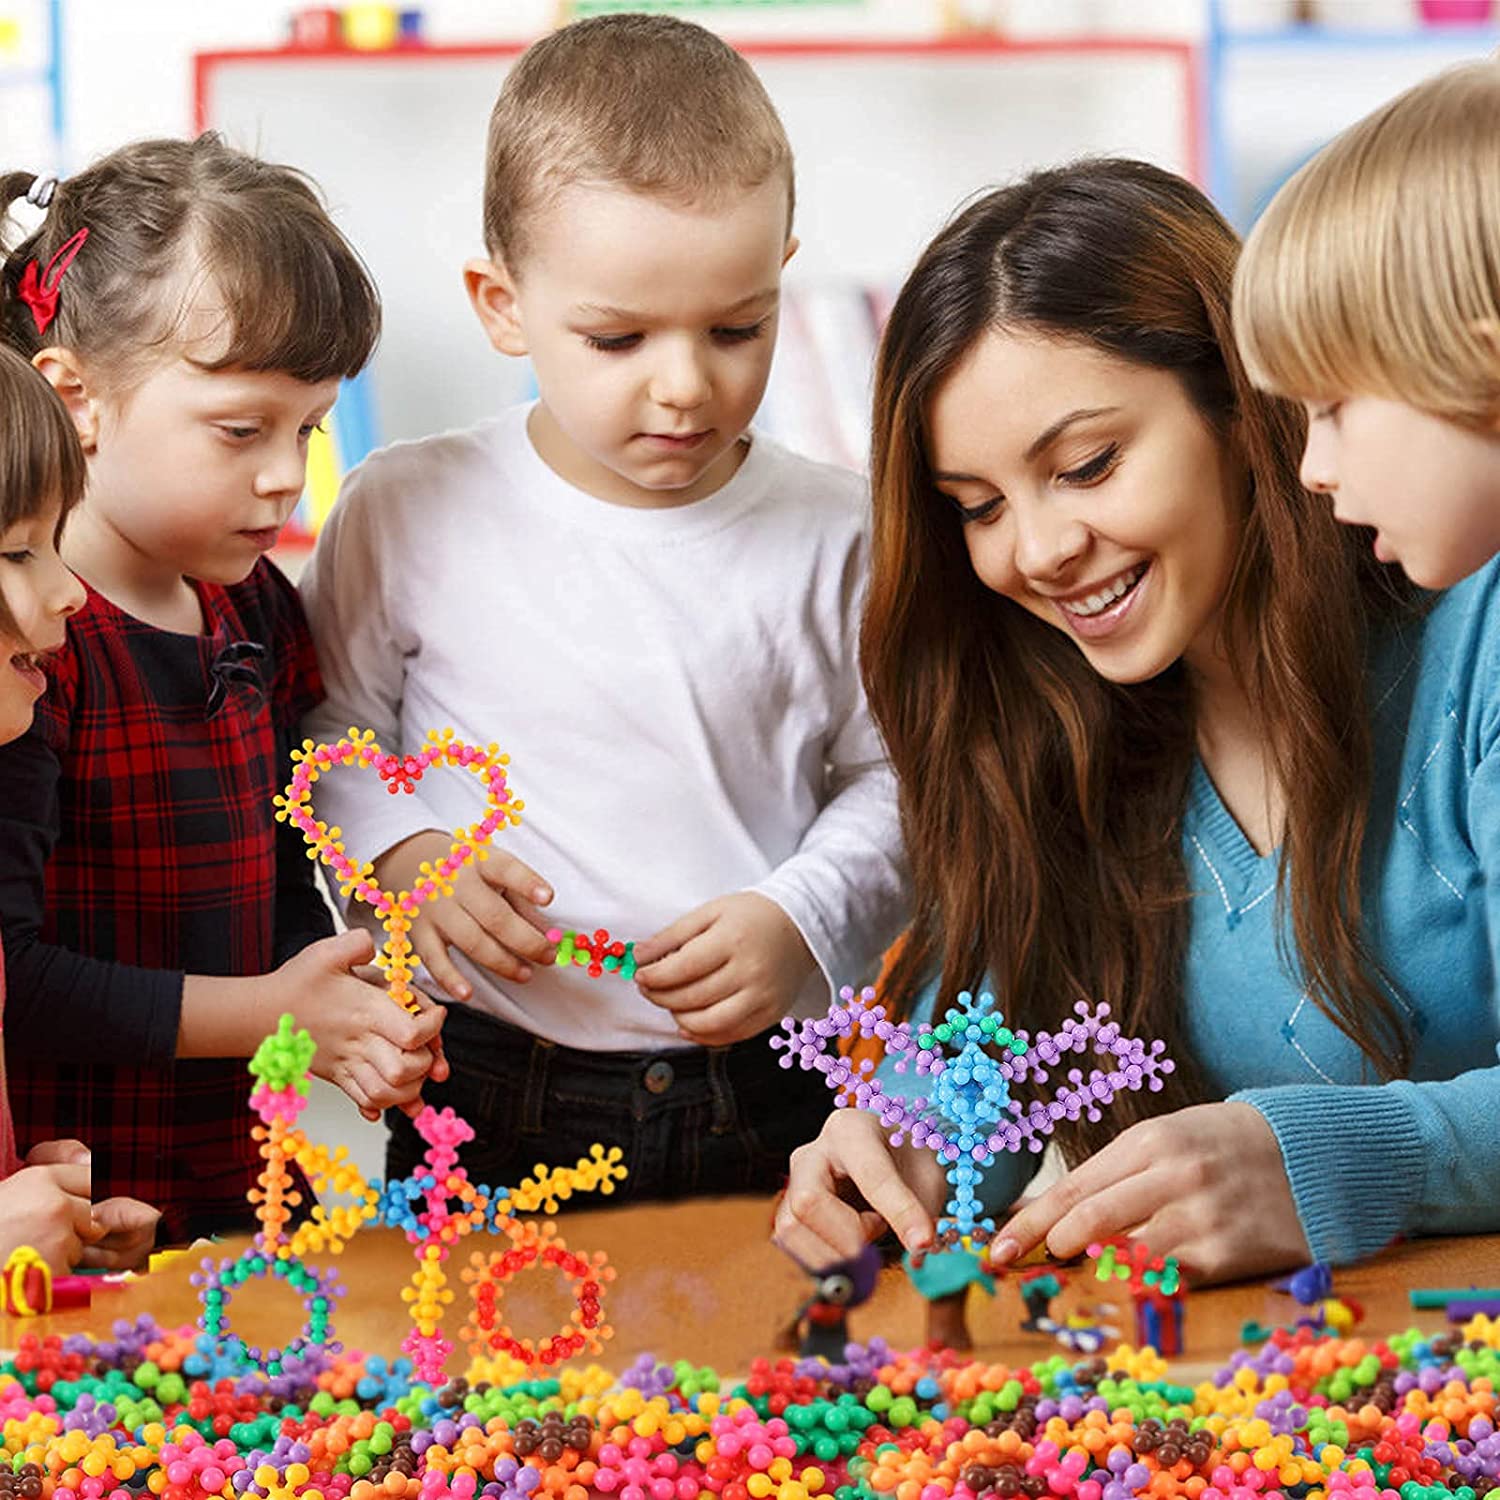 Parents must consider these factors when buying educational toys